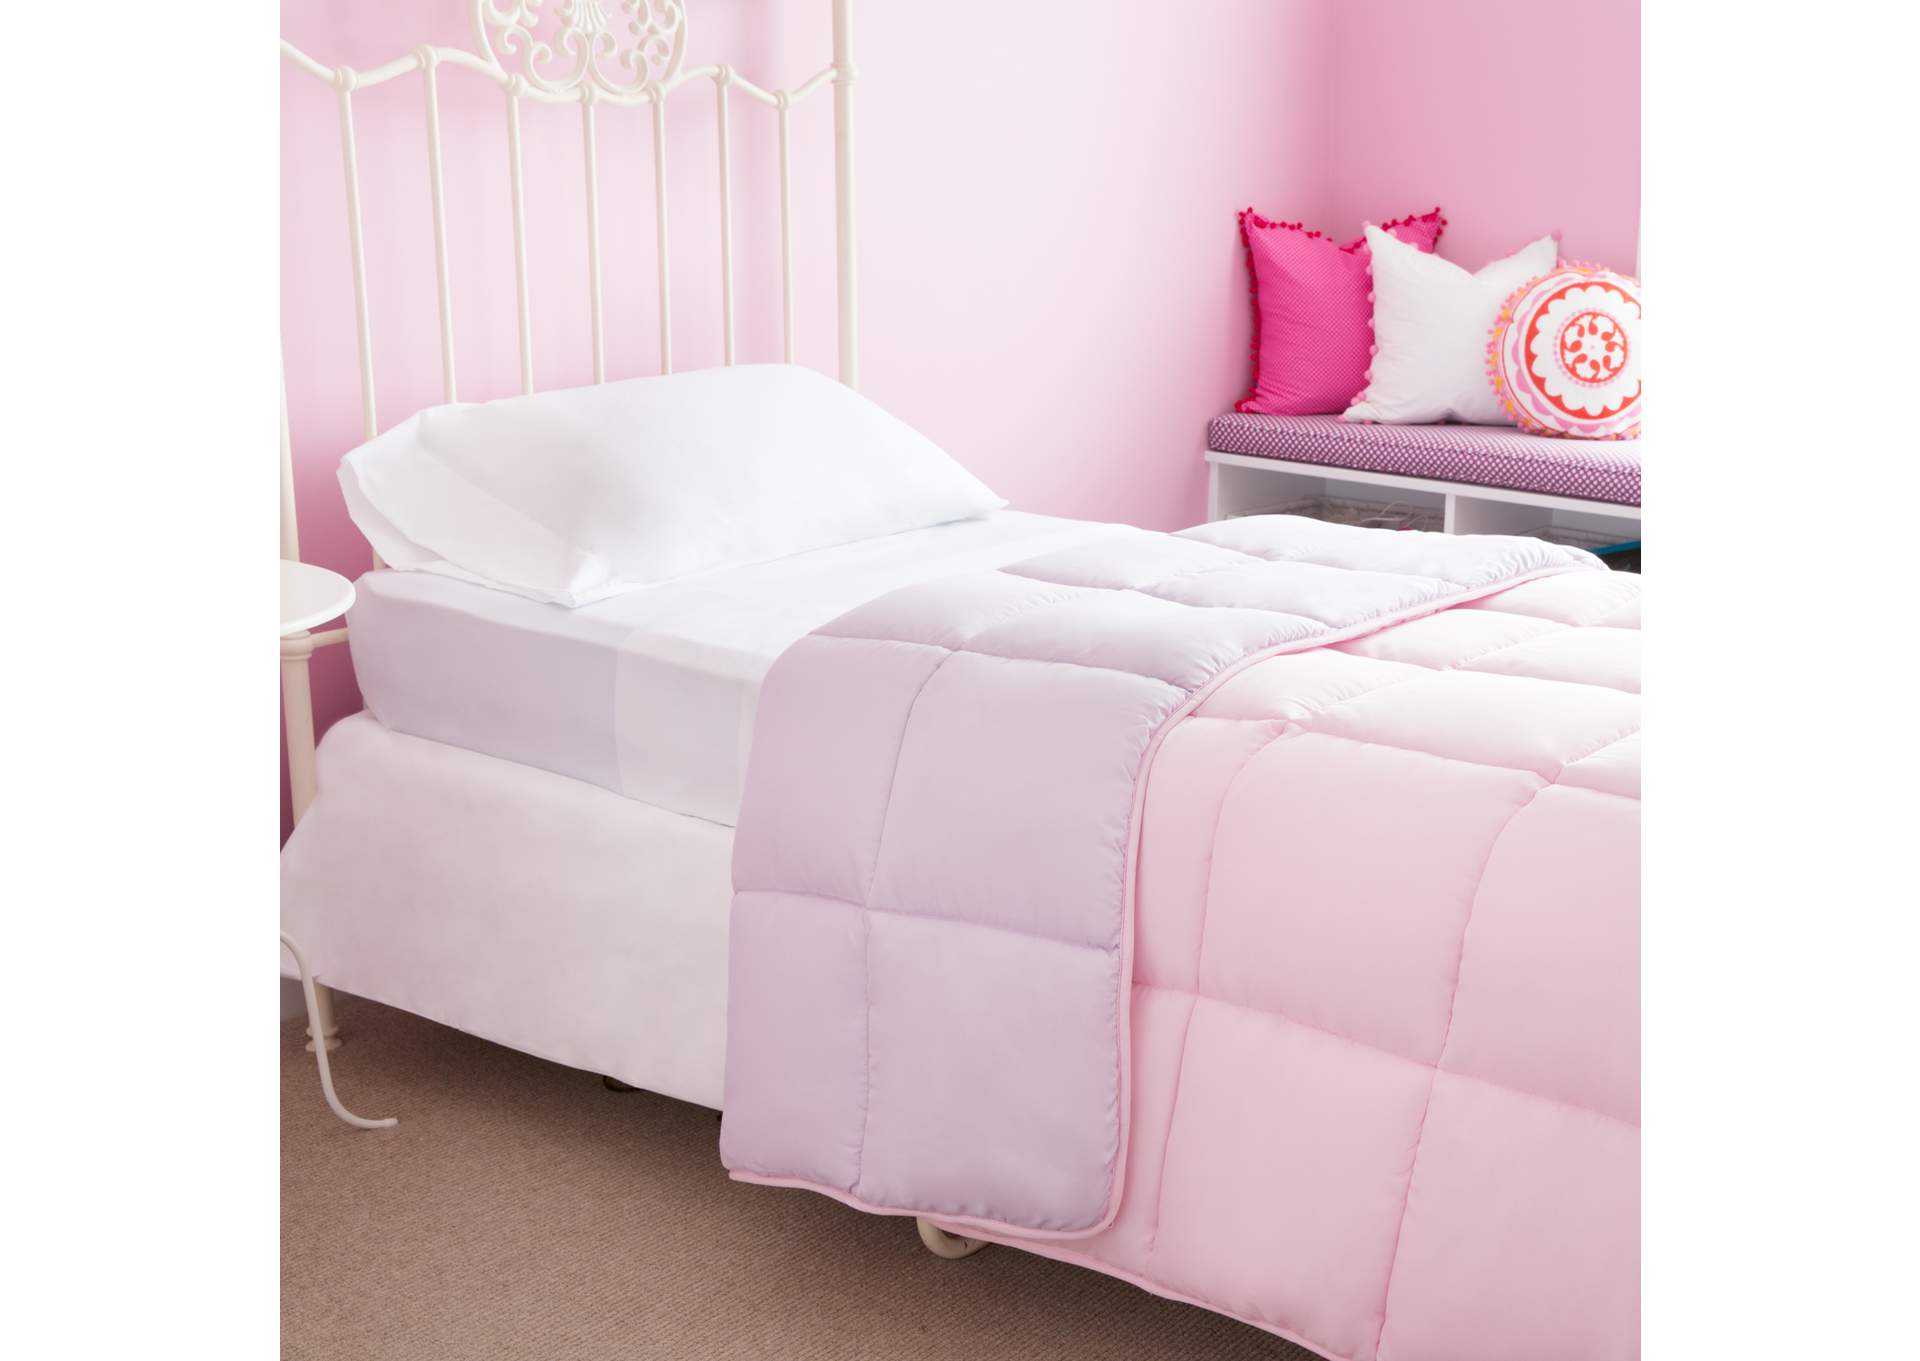 Malouf Lilac/Blush Bed in a Bag Reversible Comforters & Duvets - Full Size,Malouf